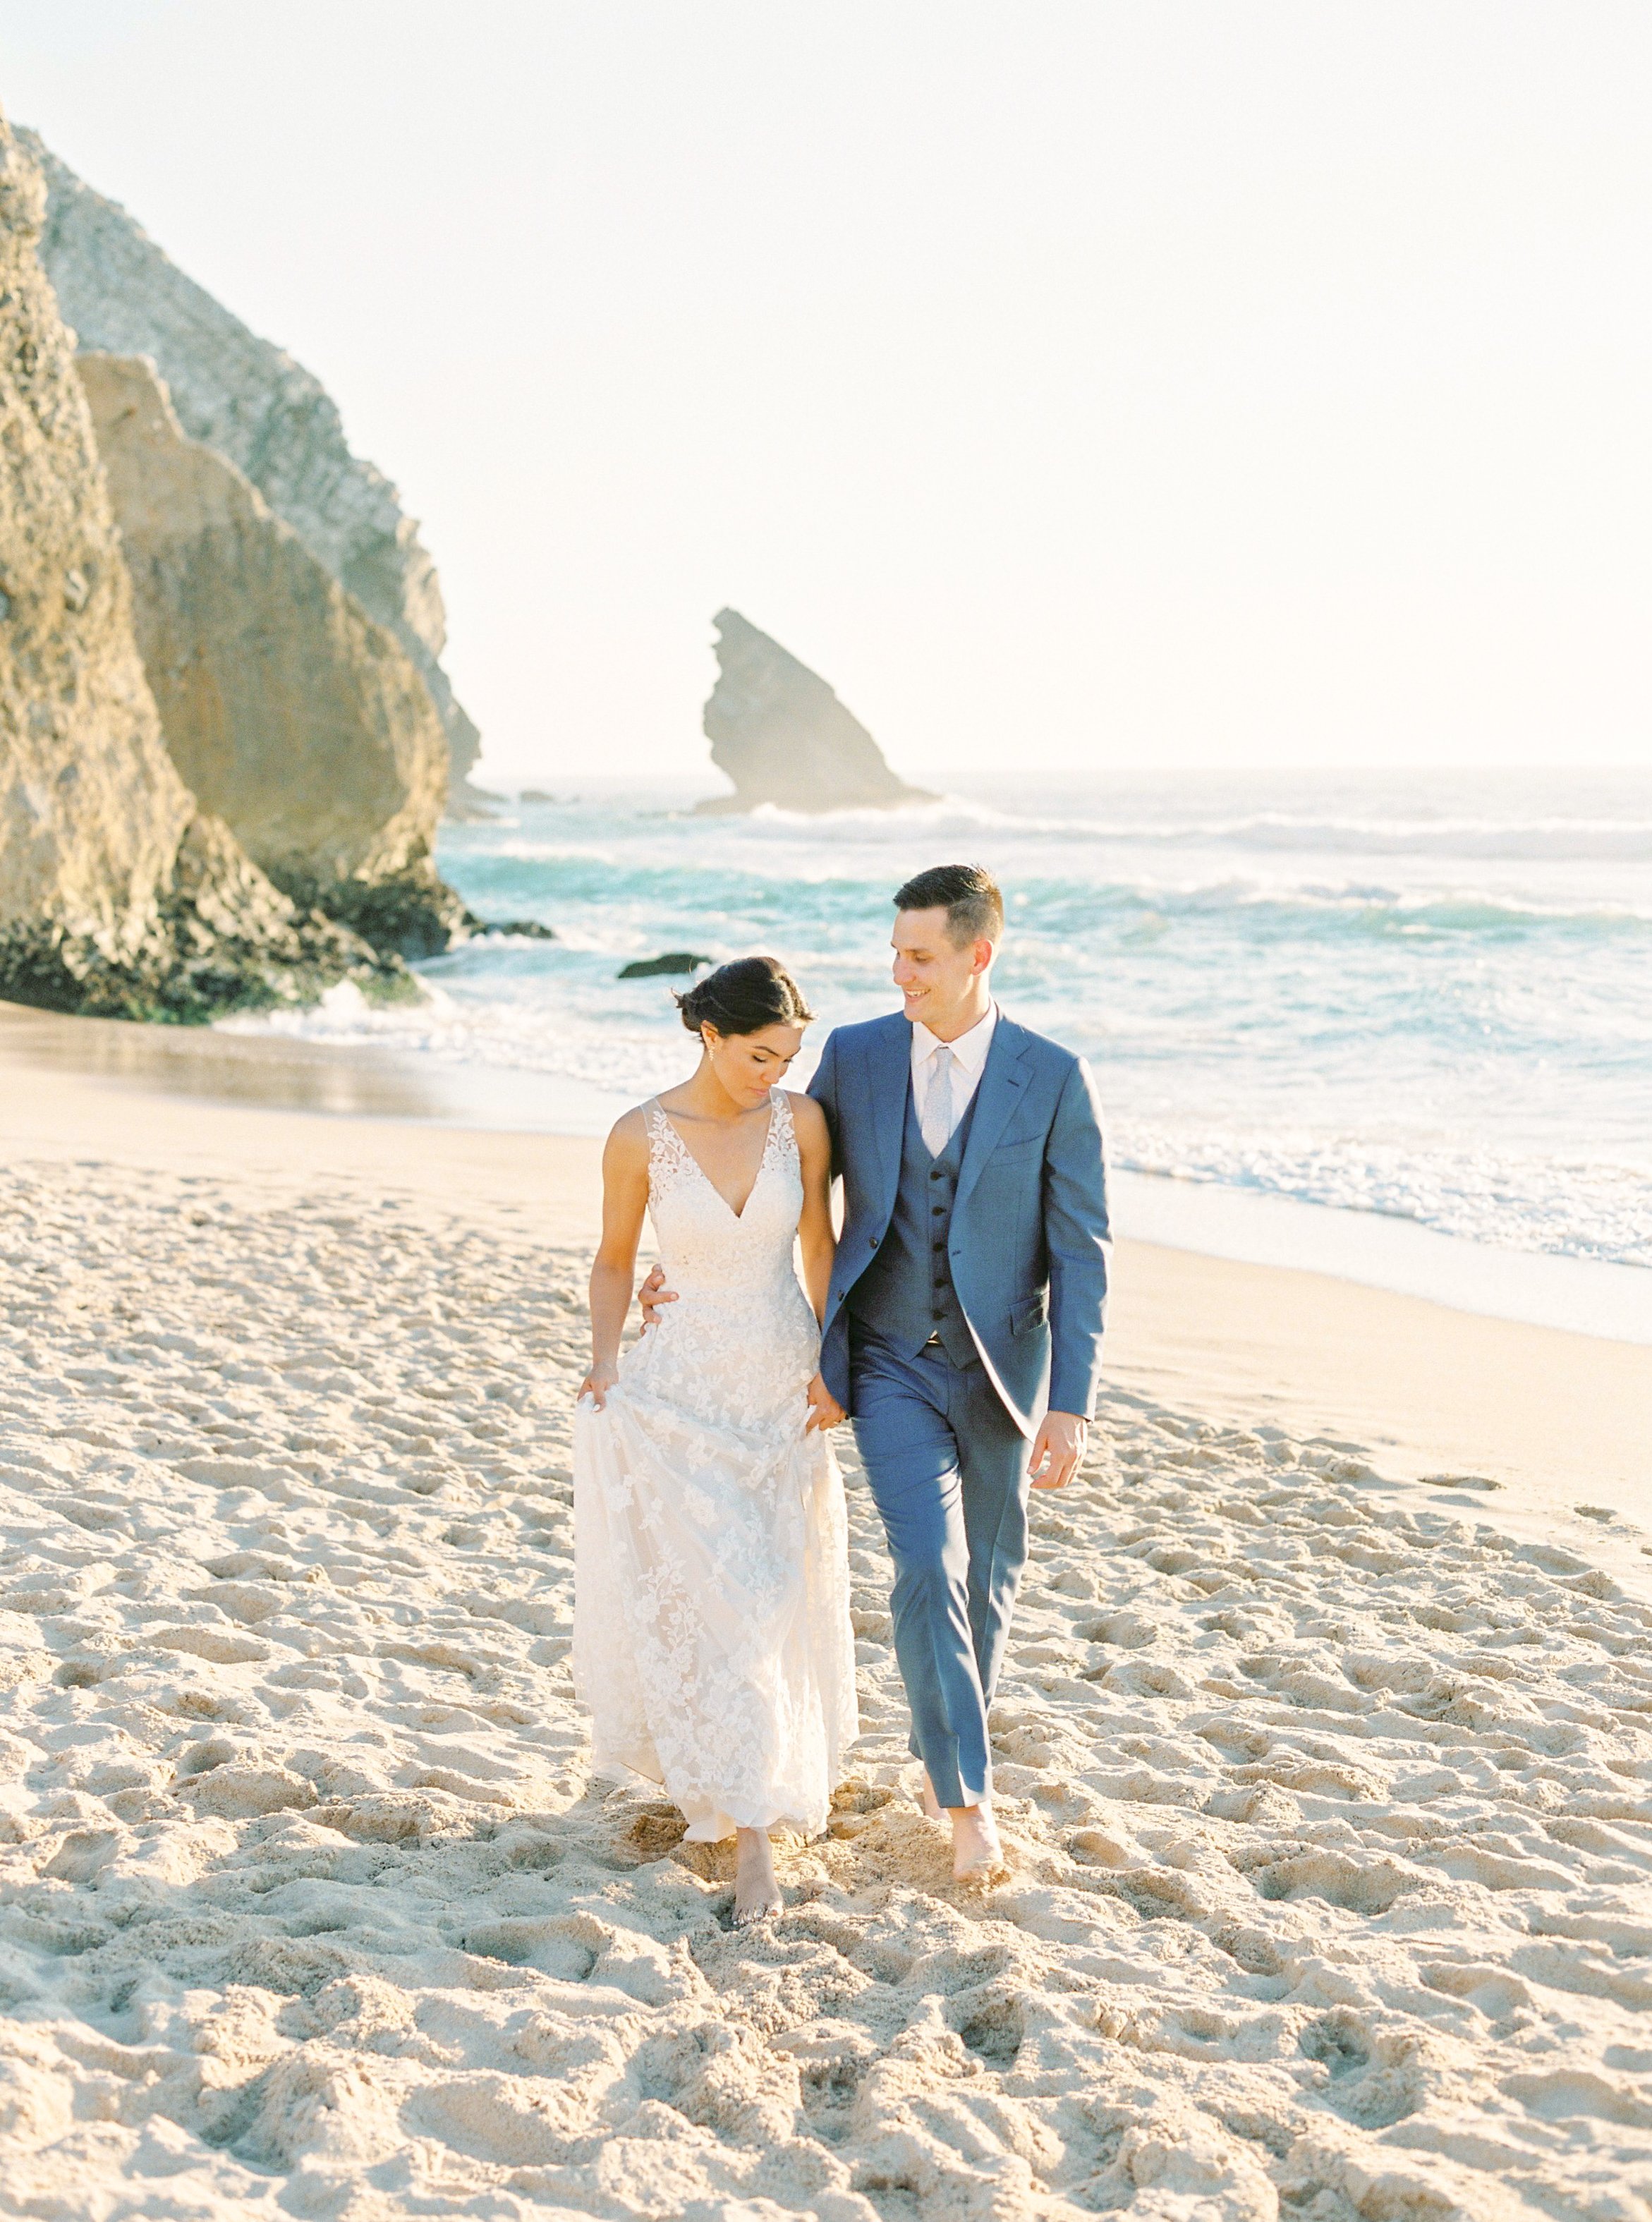 Bride and groom walking hand-in-hand on the beach of Praia da Ursa with impressive cliffs and wavy ocean in the background